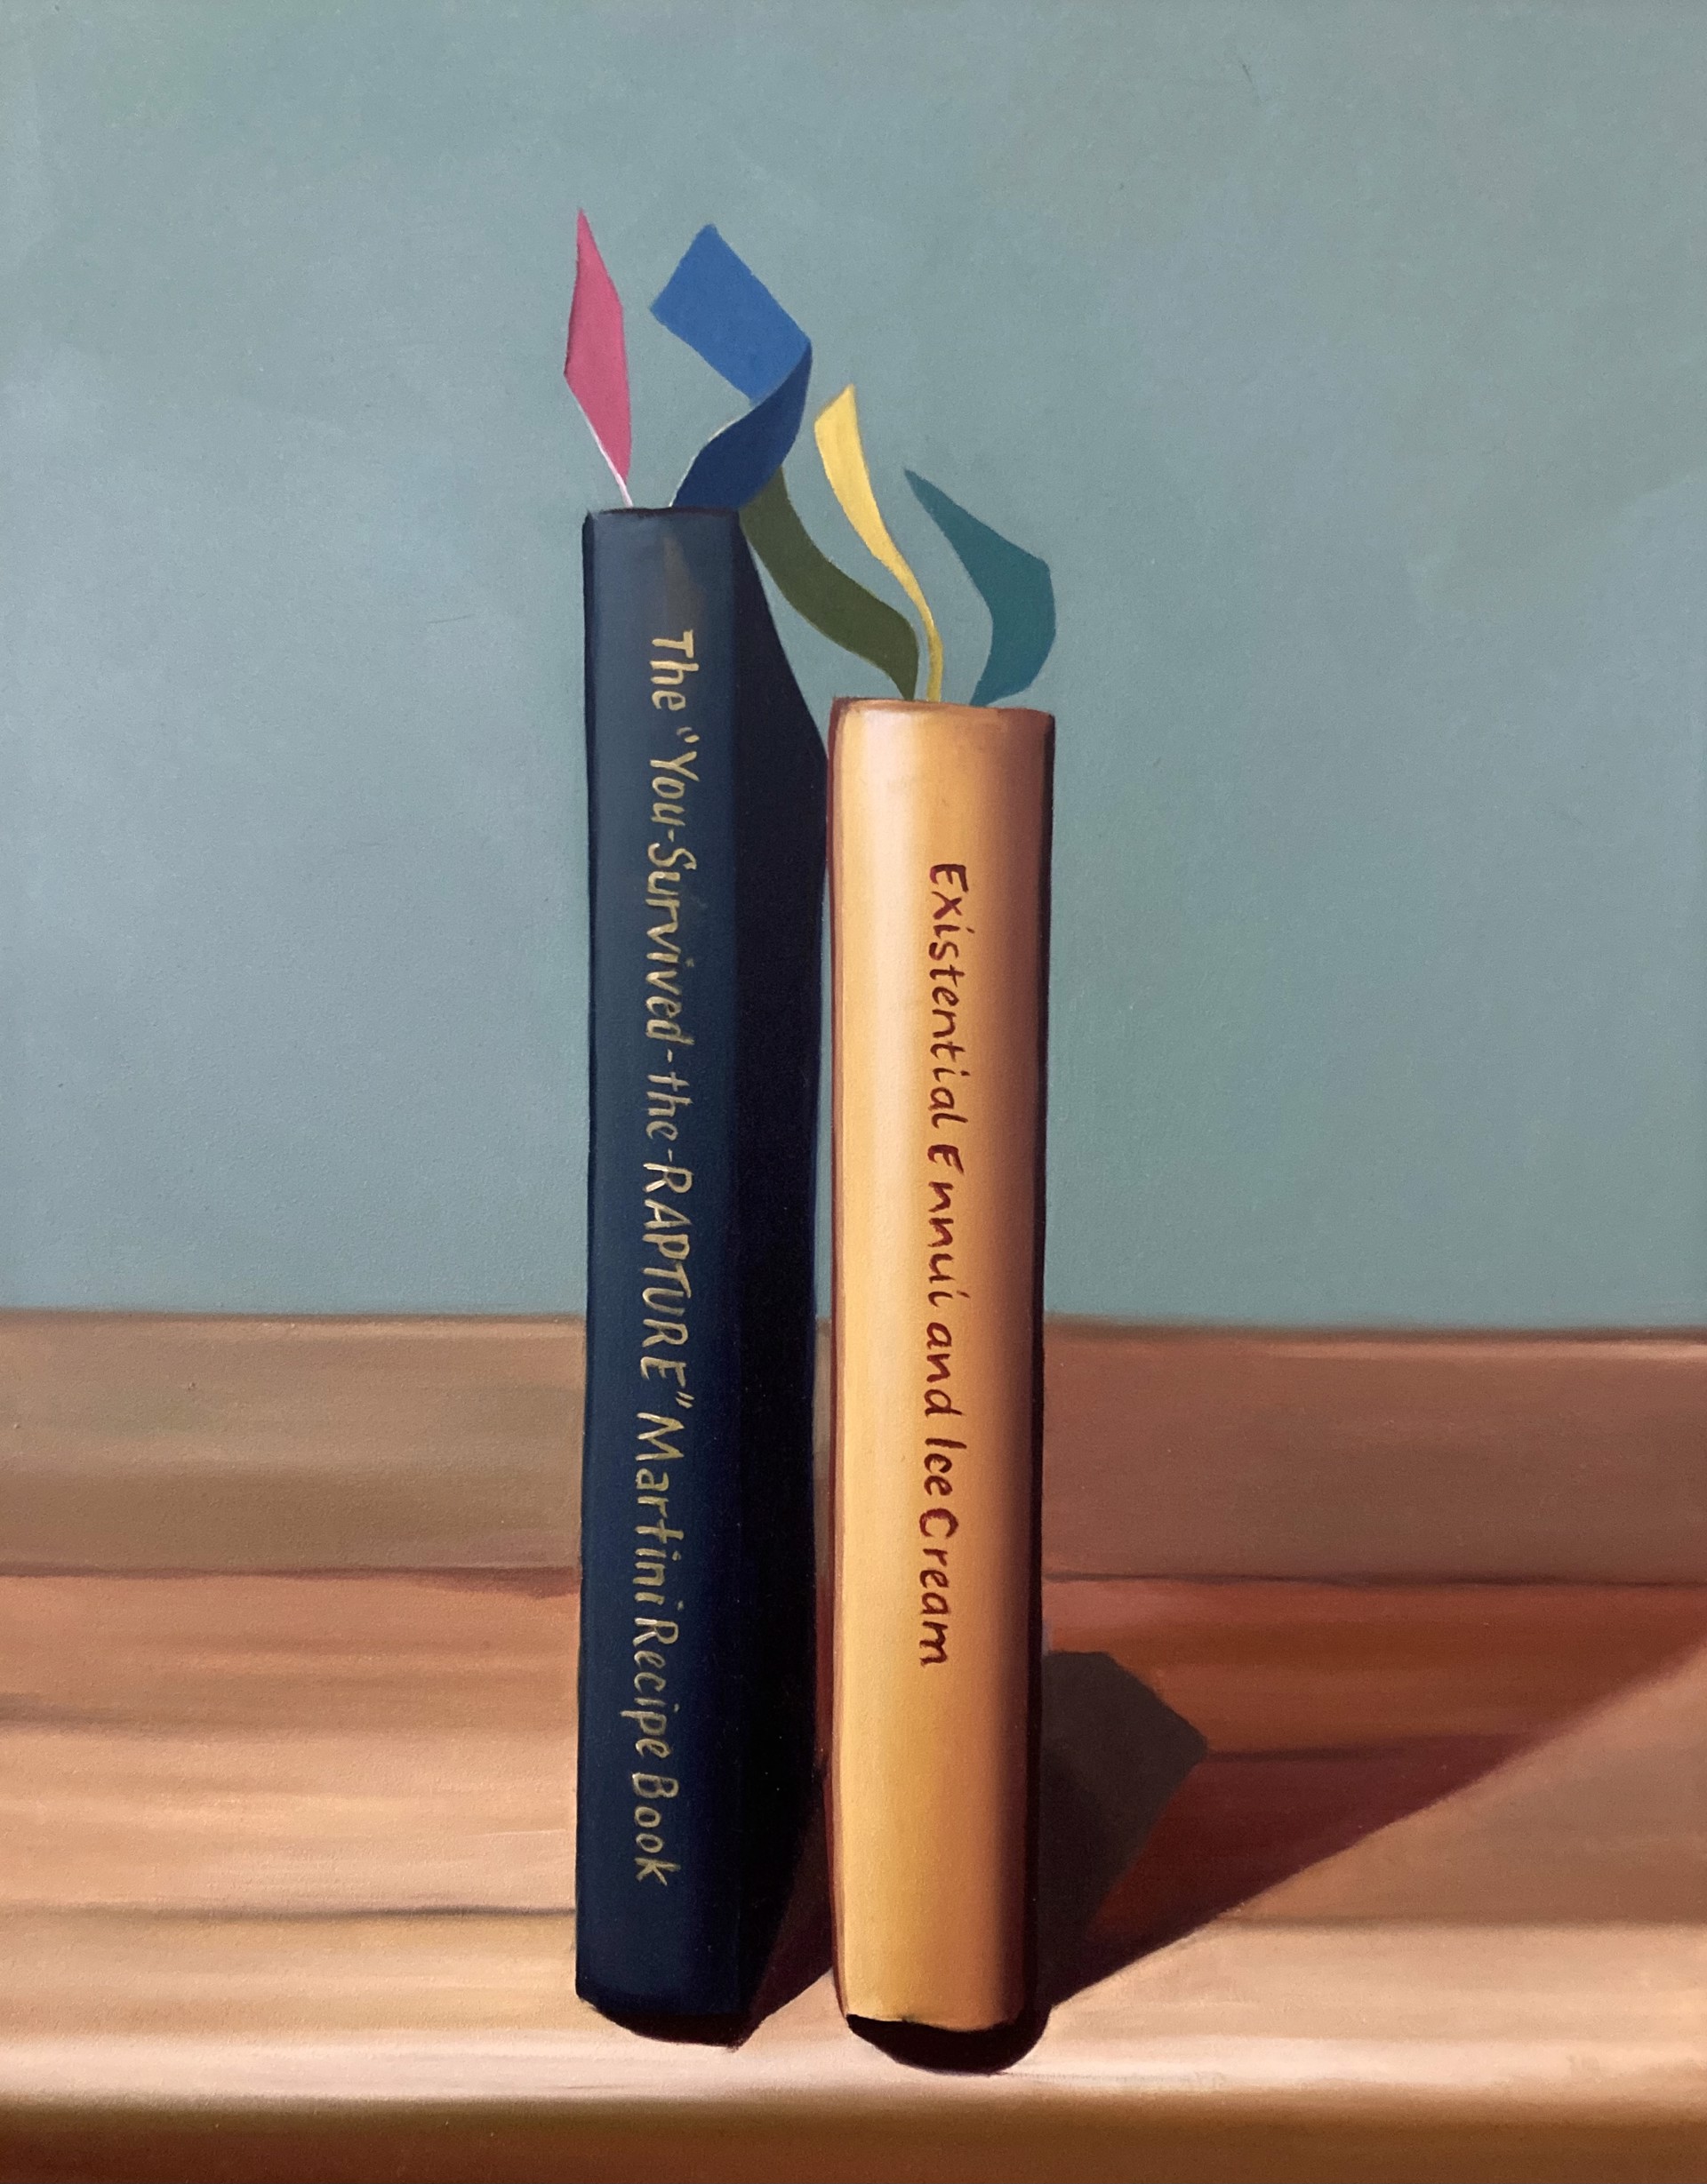 Recipe Books by Tracey Harris